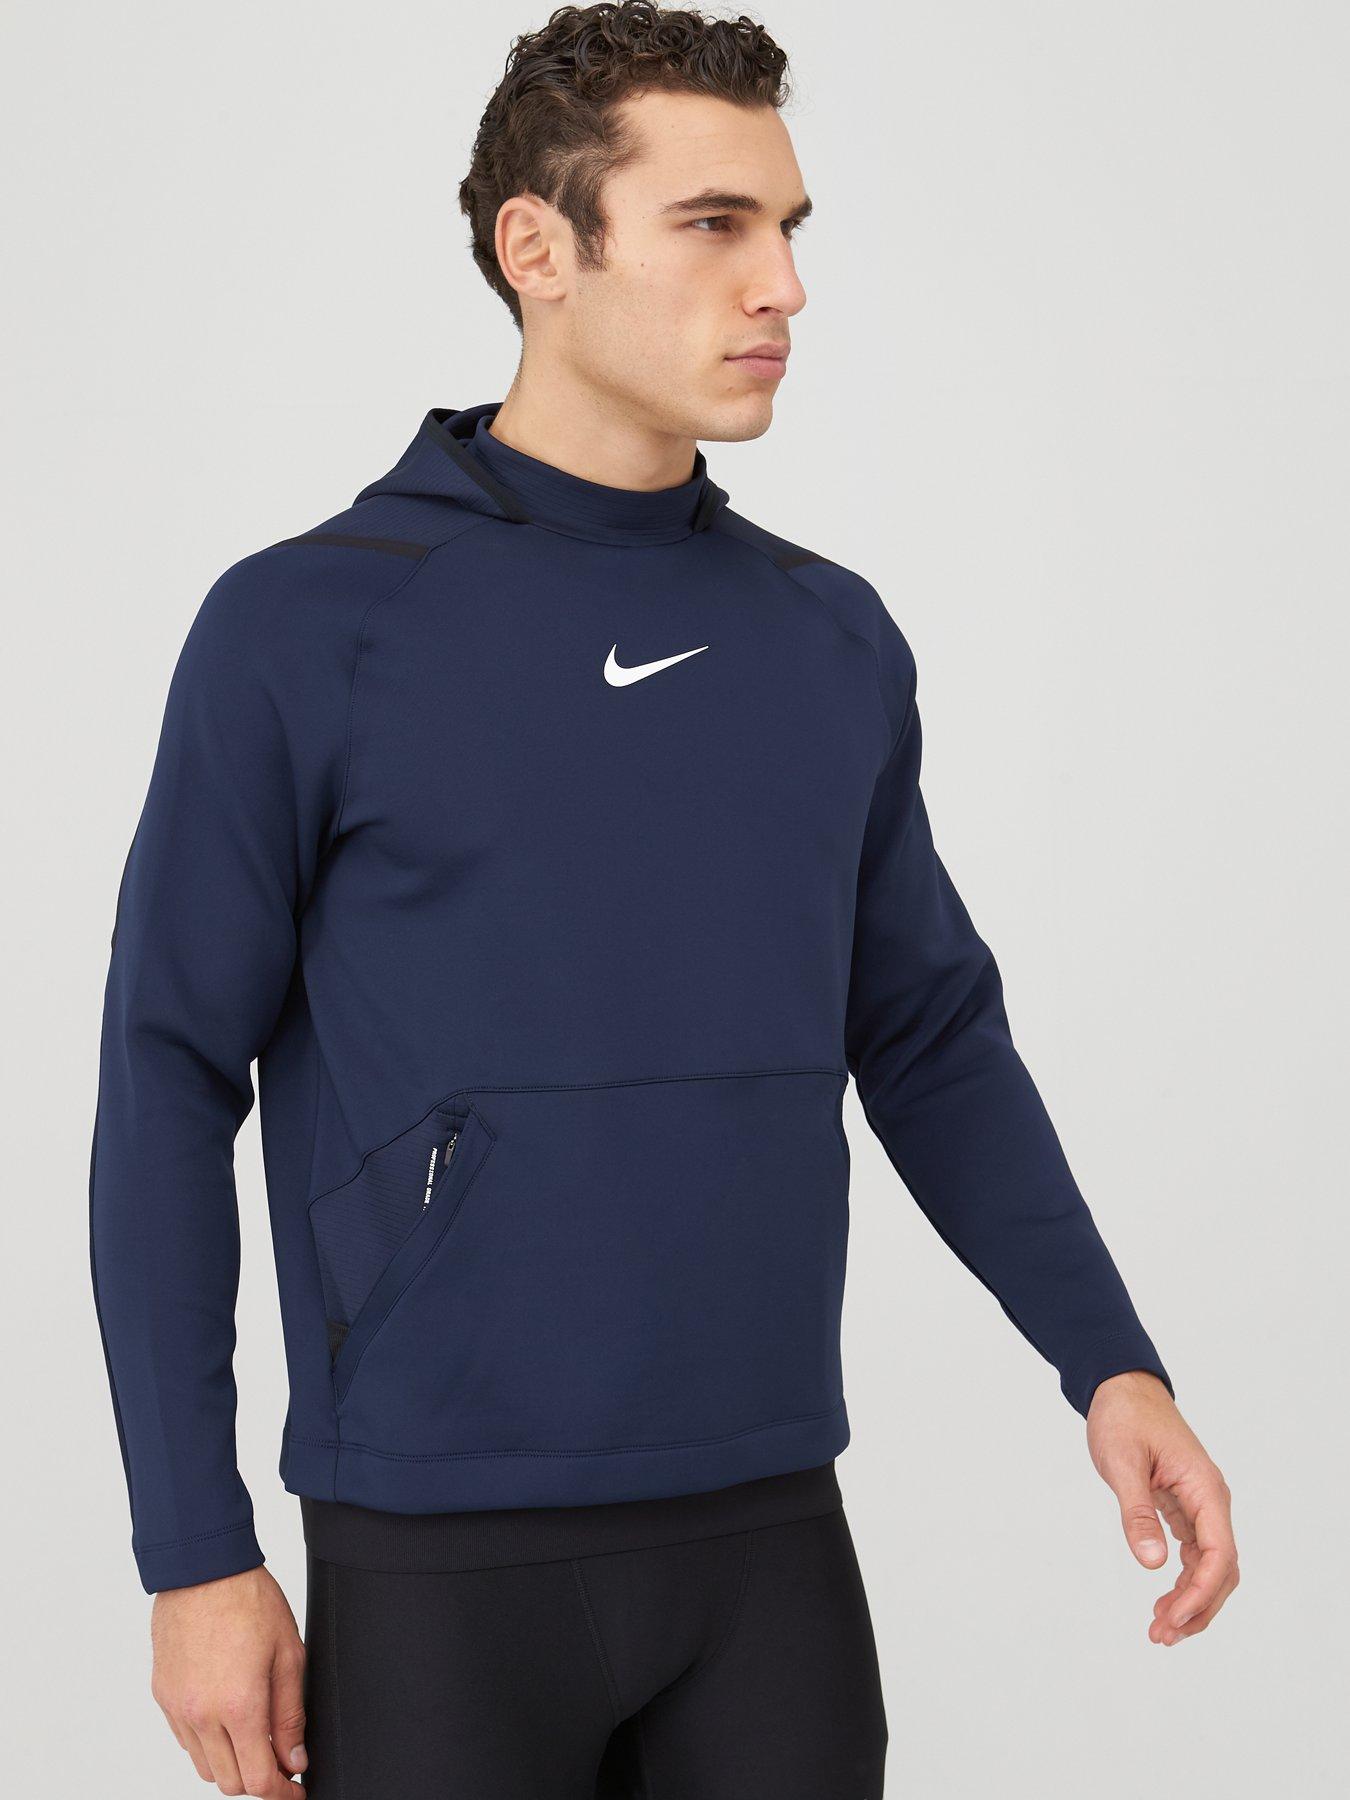 nike pro pullover